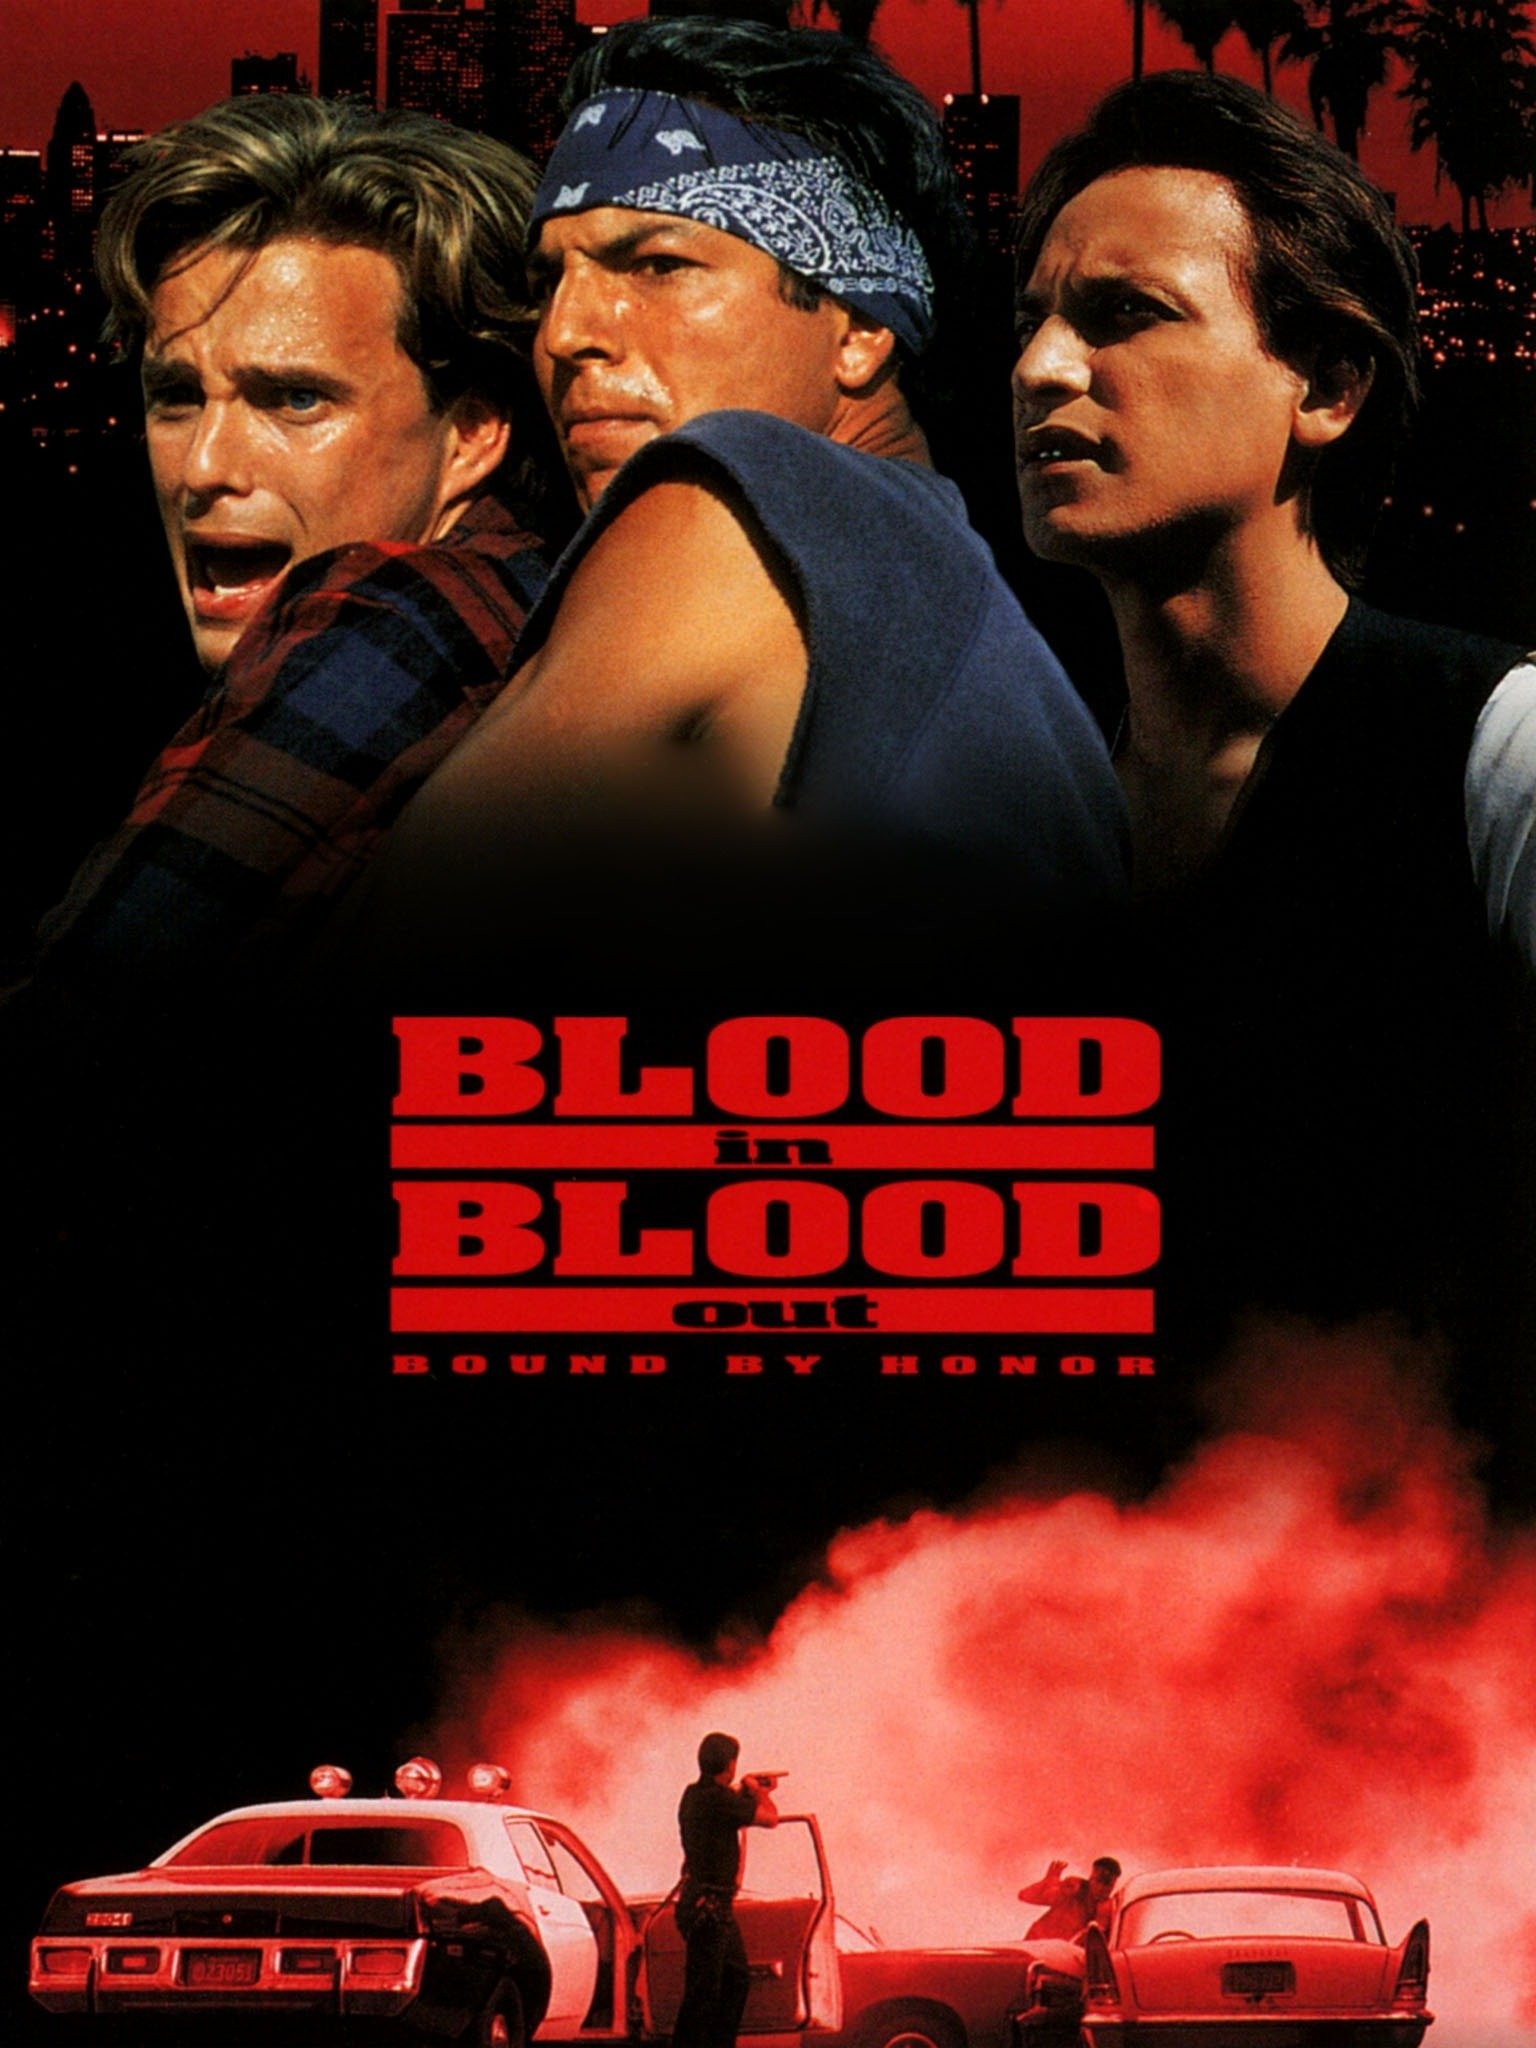 benjamen morris recommends full movie blood in blood out pic